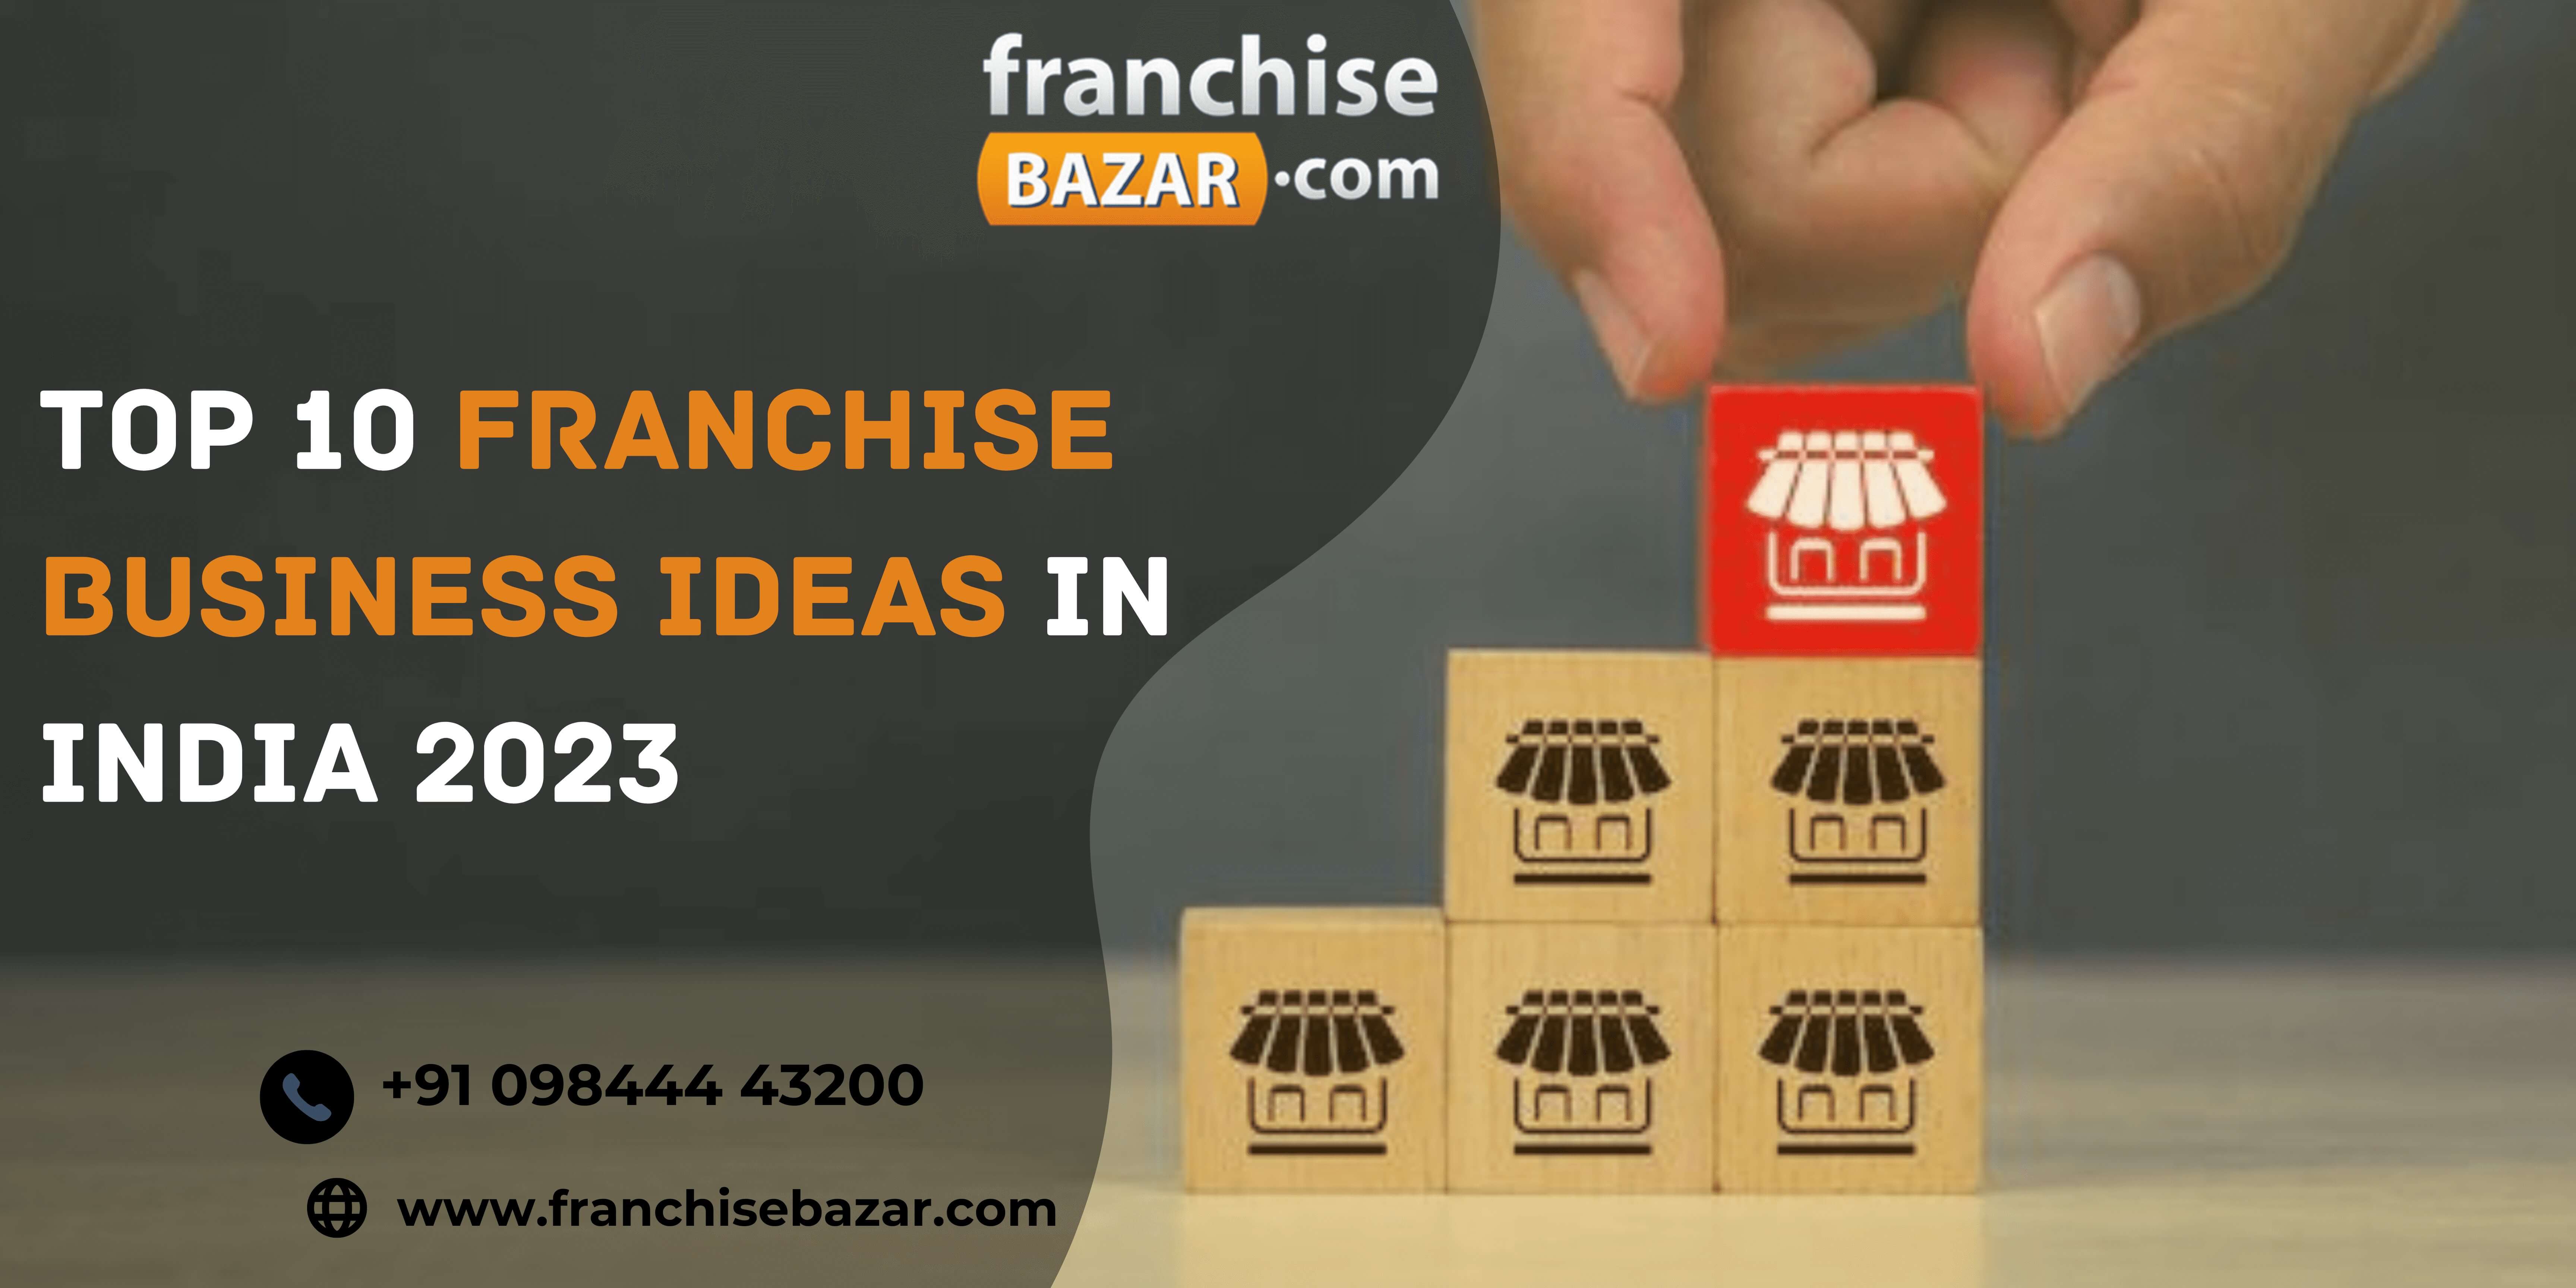 Top 10 Franchise Business Ideas in India 2023